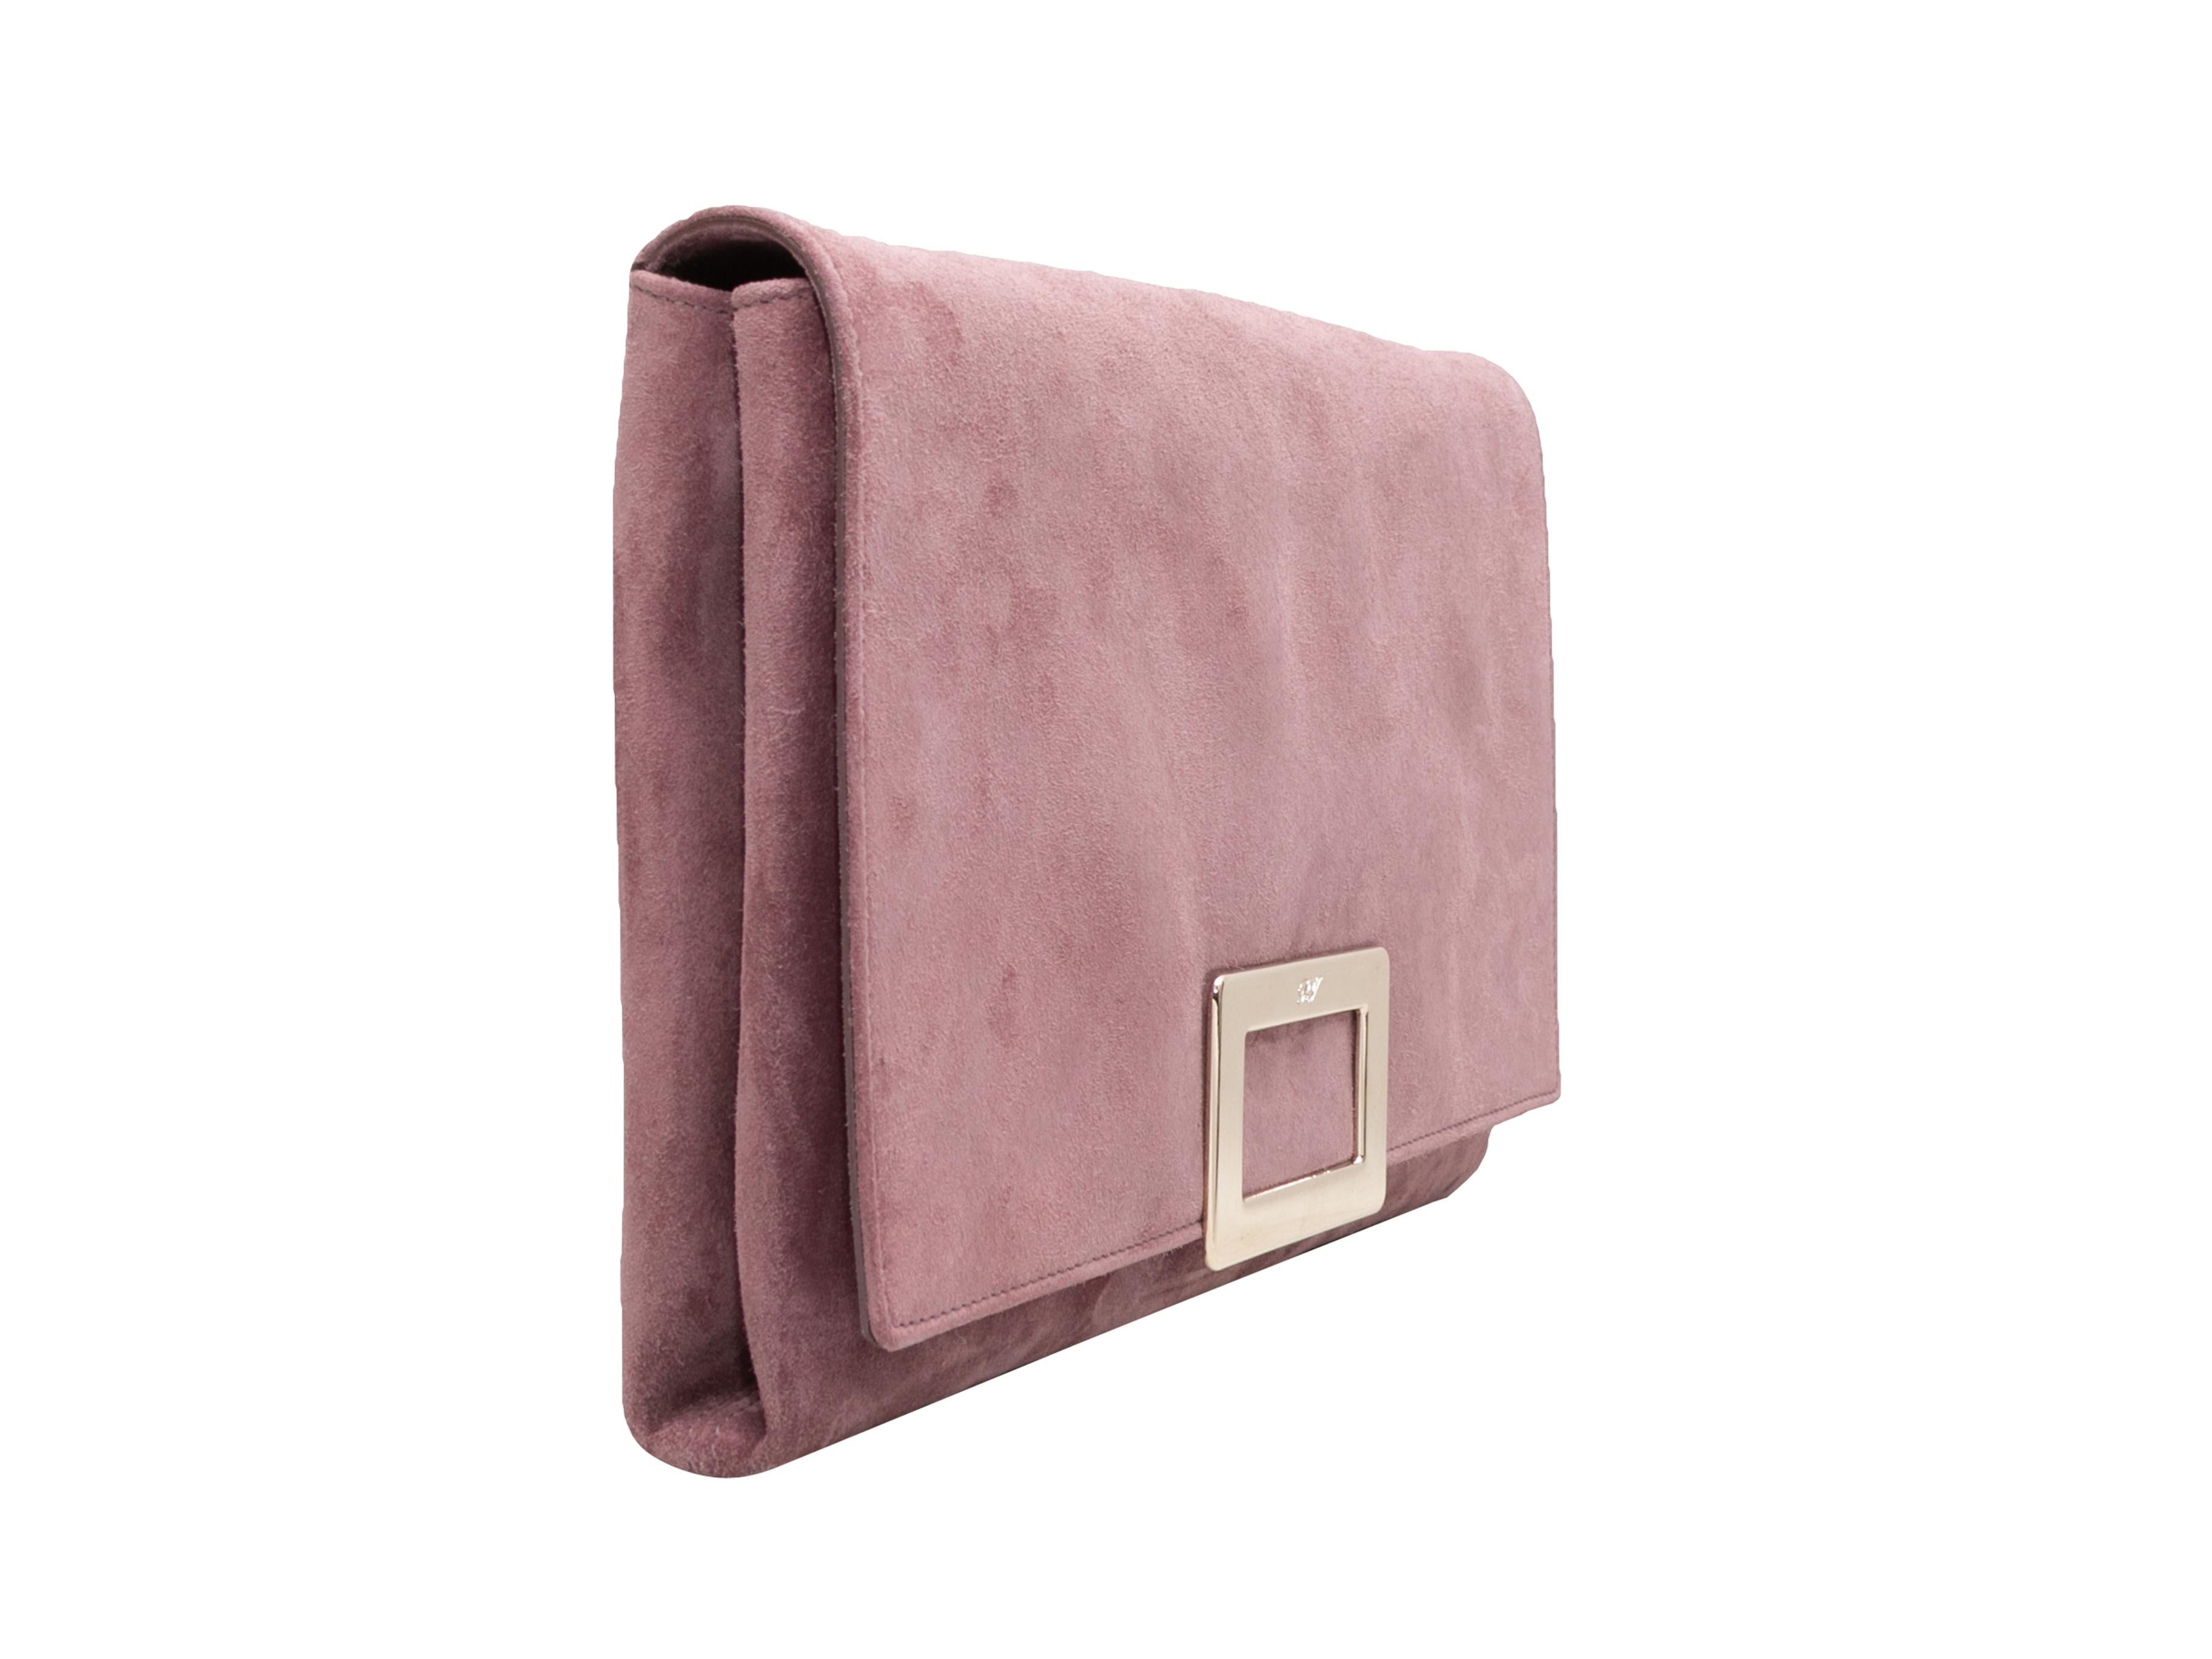 Dusty Purple Roger Vivier Suede Pochette. This pochette features a suede body, gold-tone hardware, optional strap, and a front flap closure. 11.5